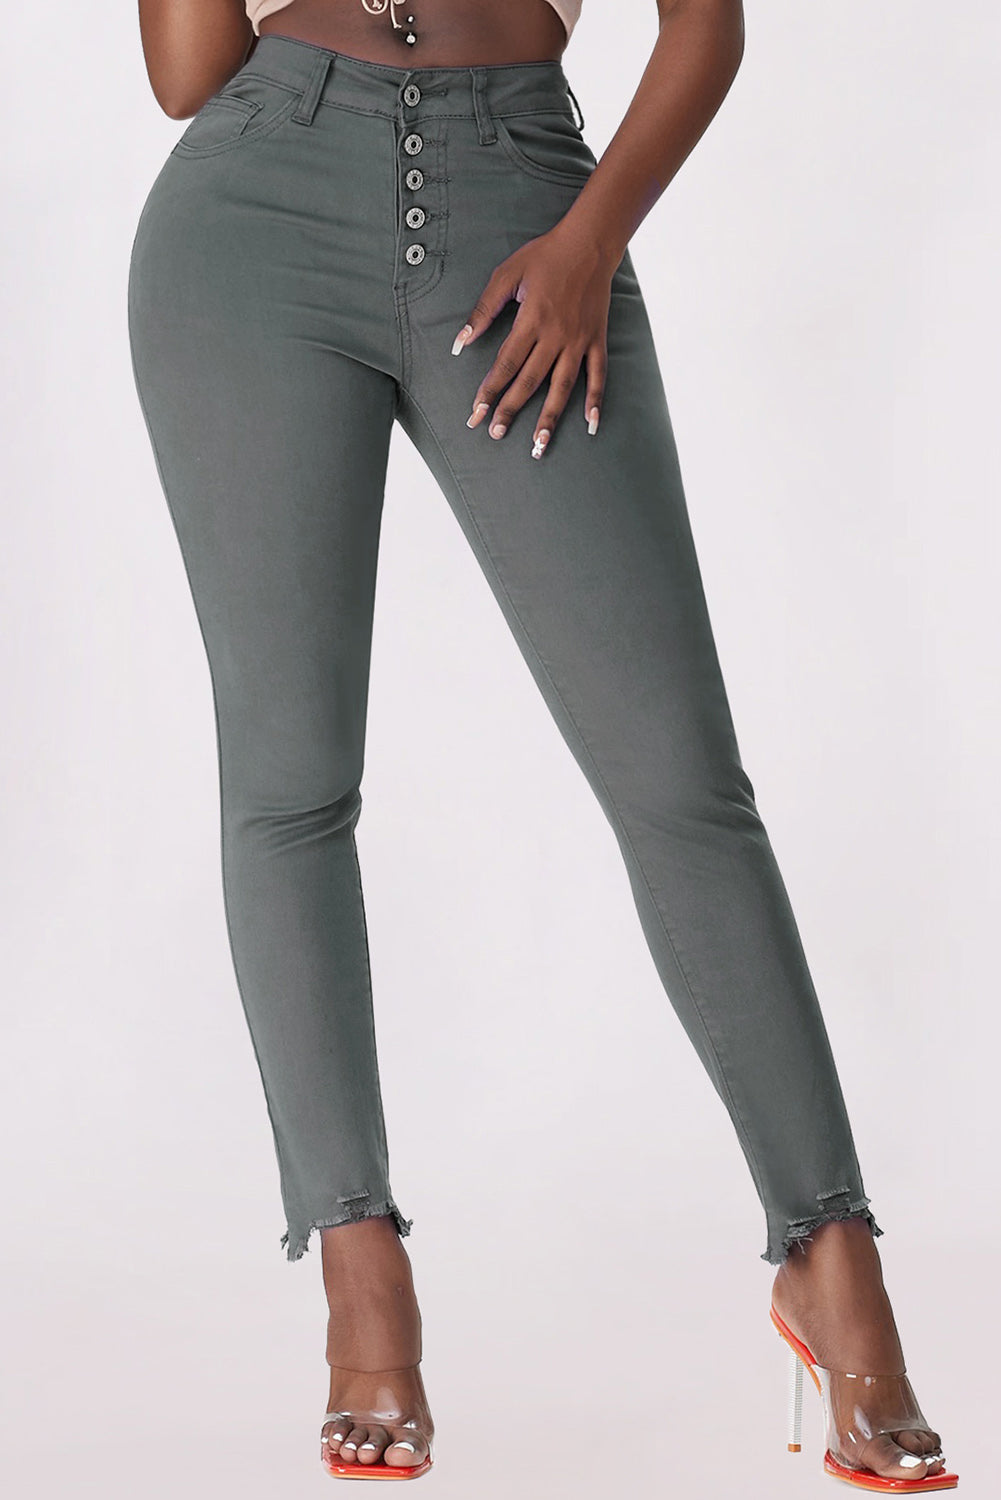 Button Fly Hem Detail Skinny Jeans -  Nueva Moda Boutique By Giselly 